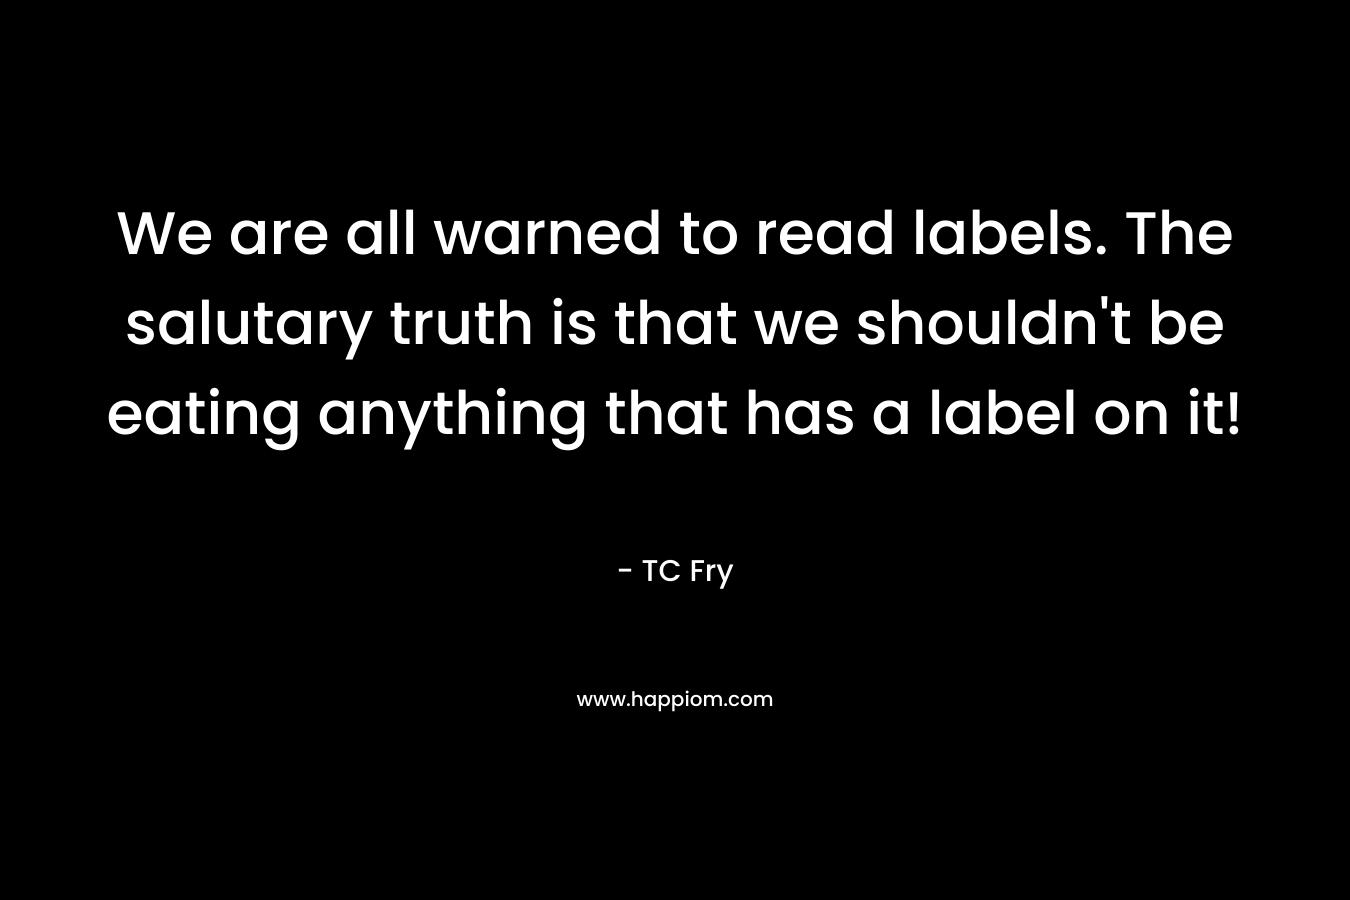 We are all warned to read labels. The salutary truth is that we shouldn't be eating anything that has a label on it!